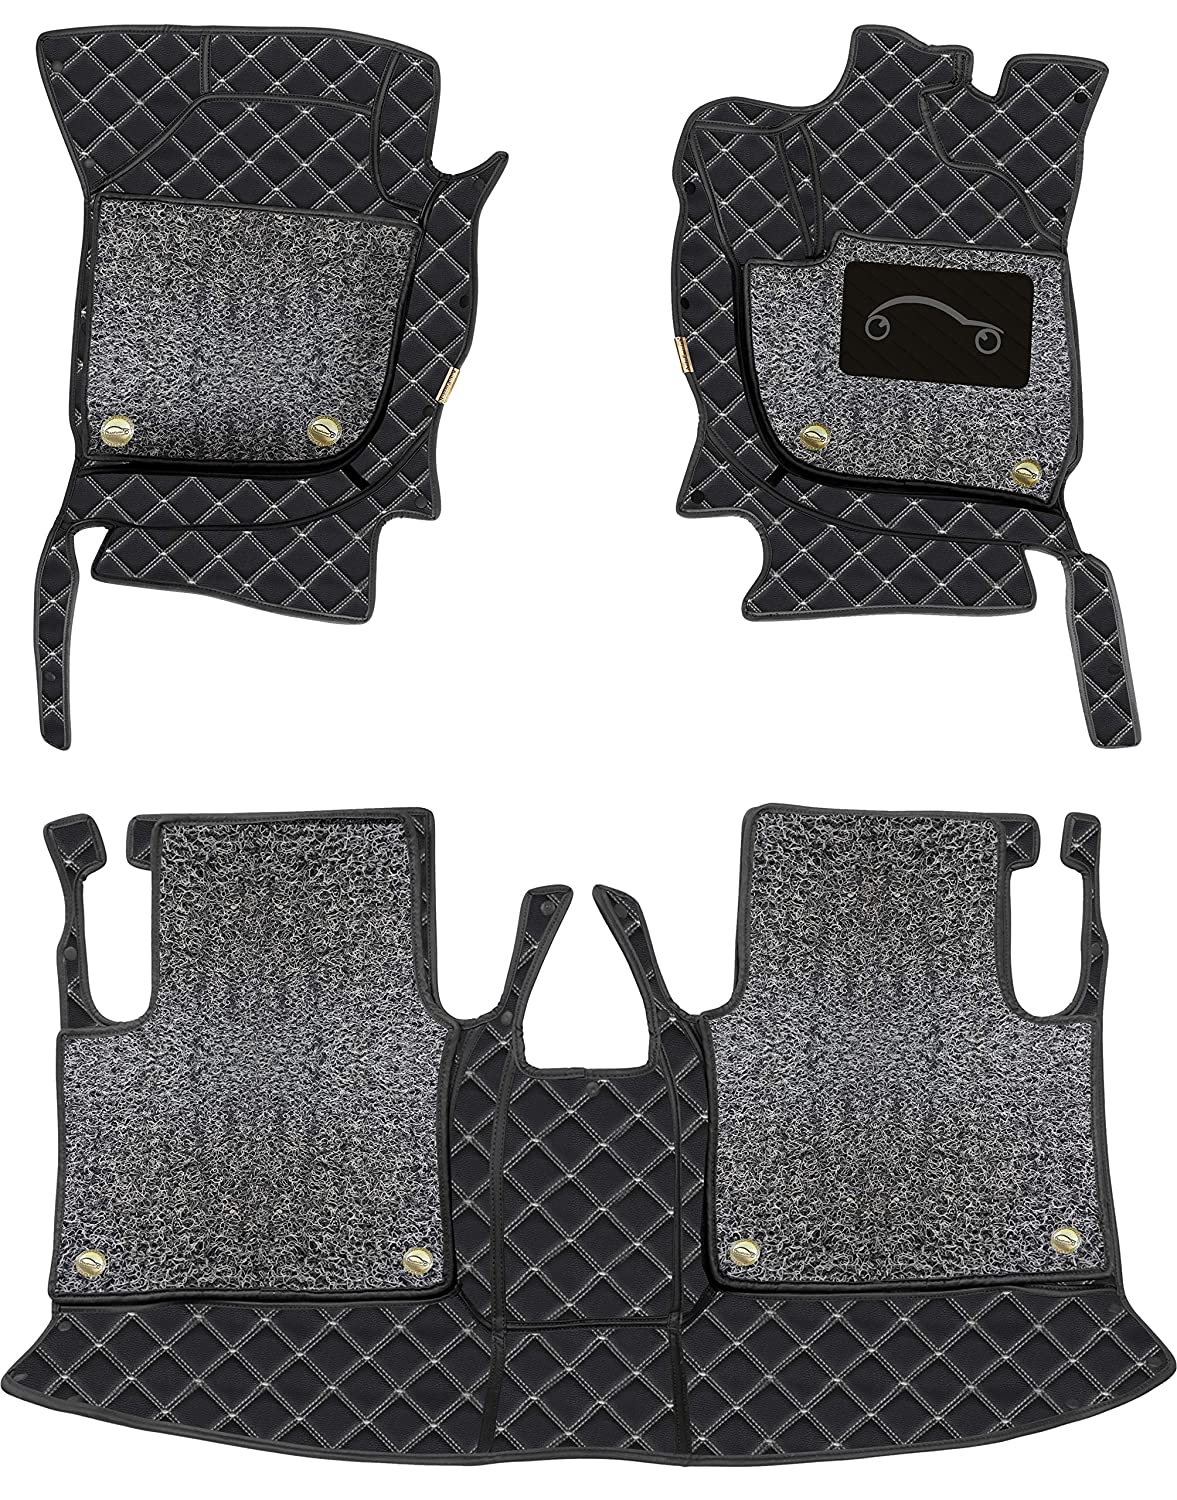 Mini Cooper S Clubman 2020 7D Luxury Car Mat, All Weather Proof, Anti-Skid, 100% Waterproof & Odorless with Unique Diamond Fish Design (24mm Luxury PU Leather, 2 Rows)